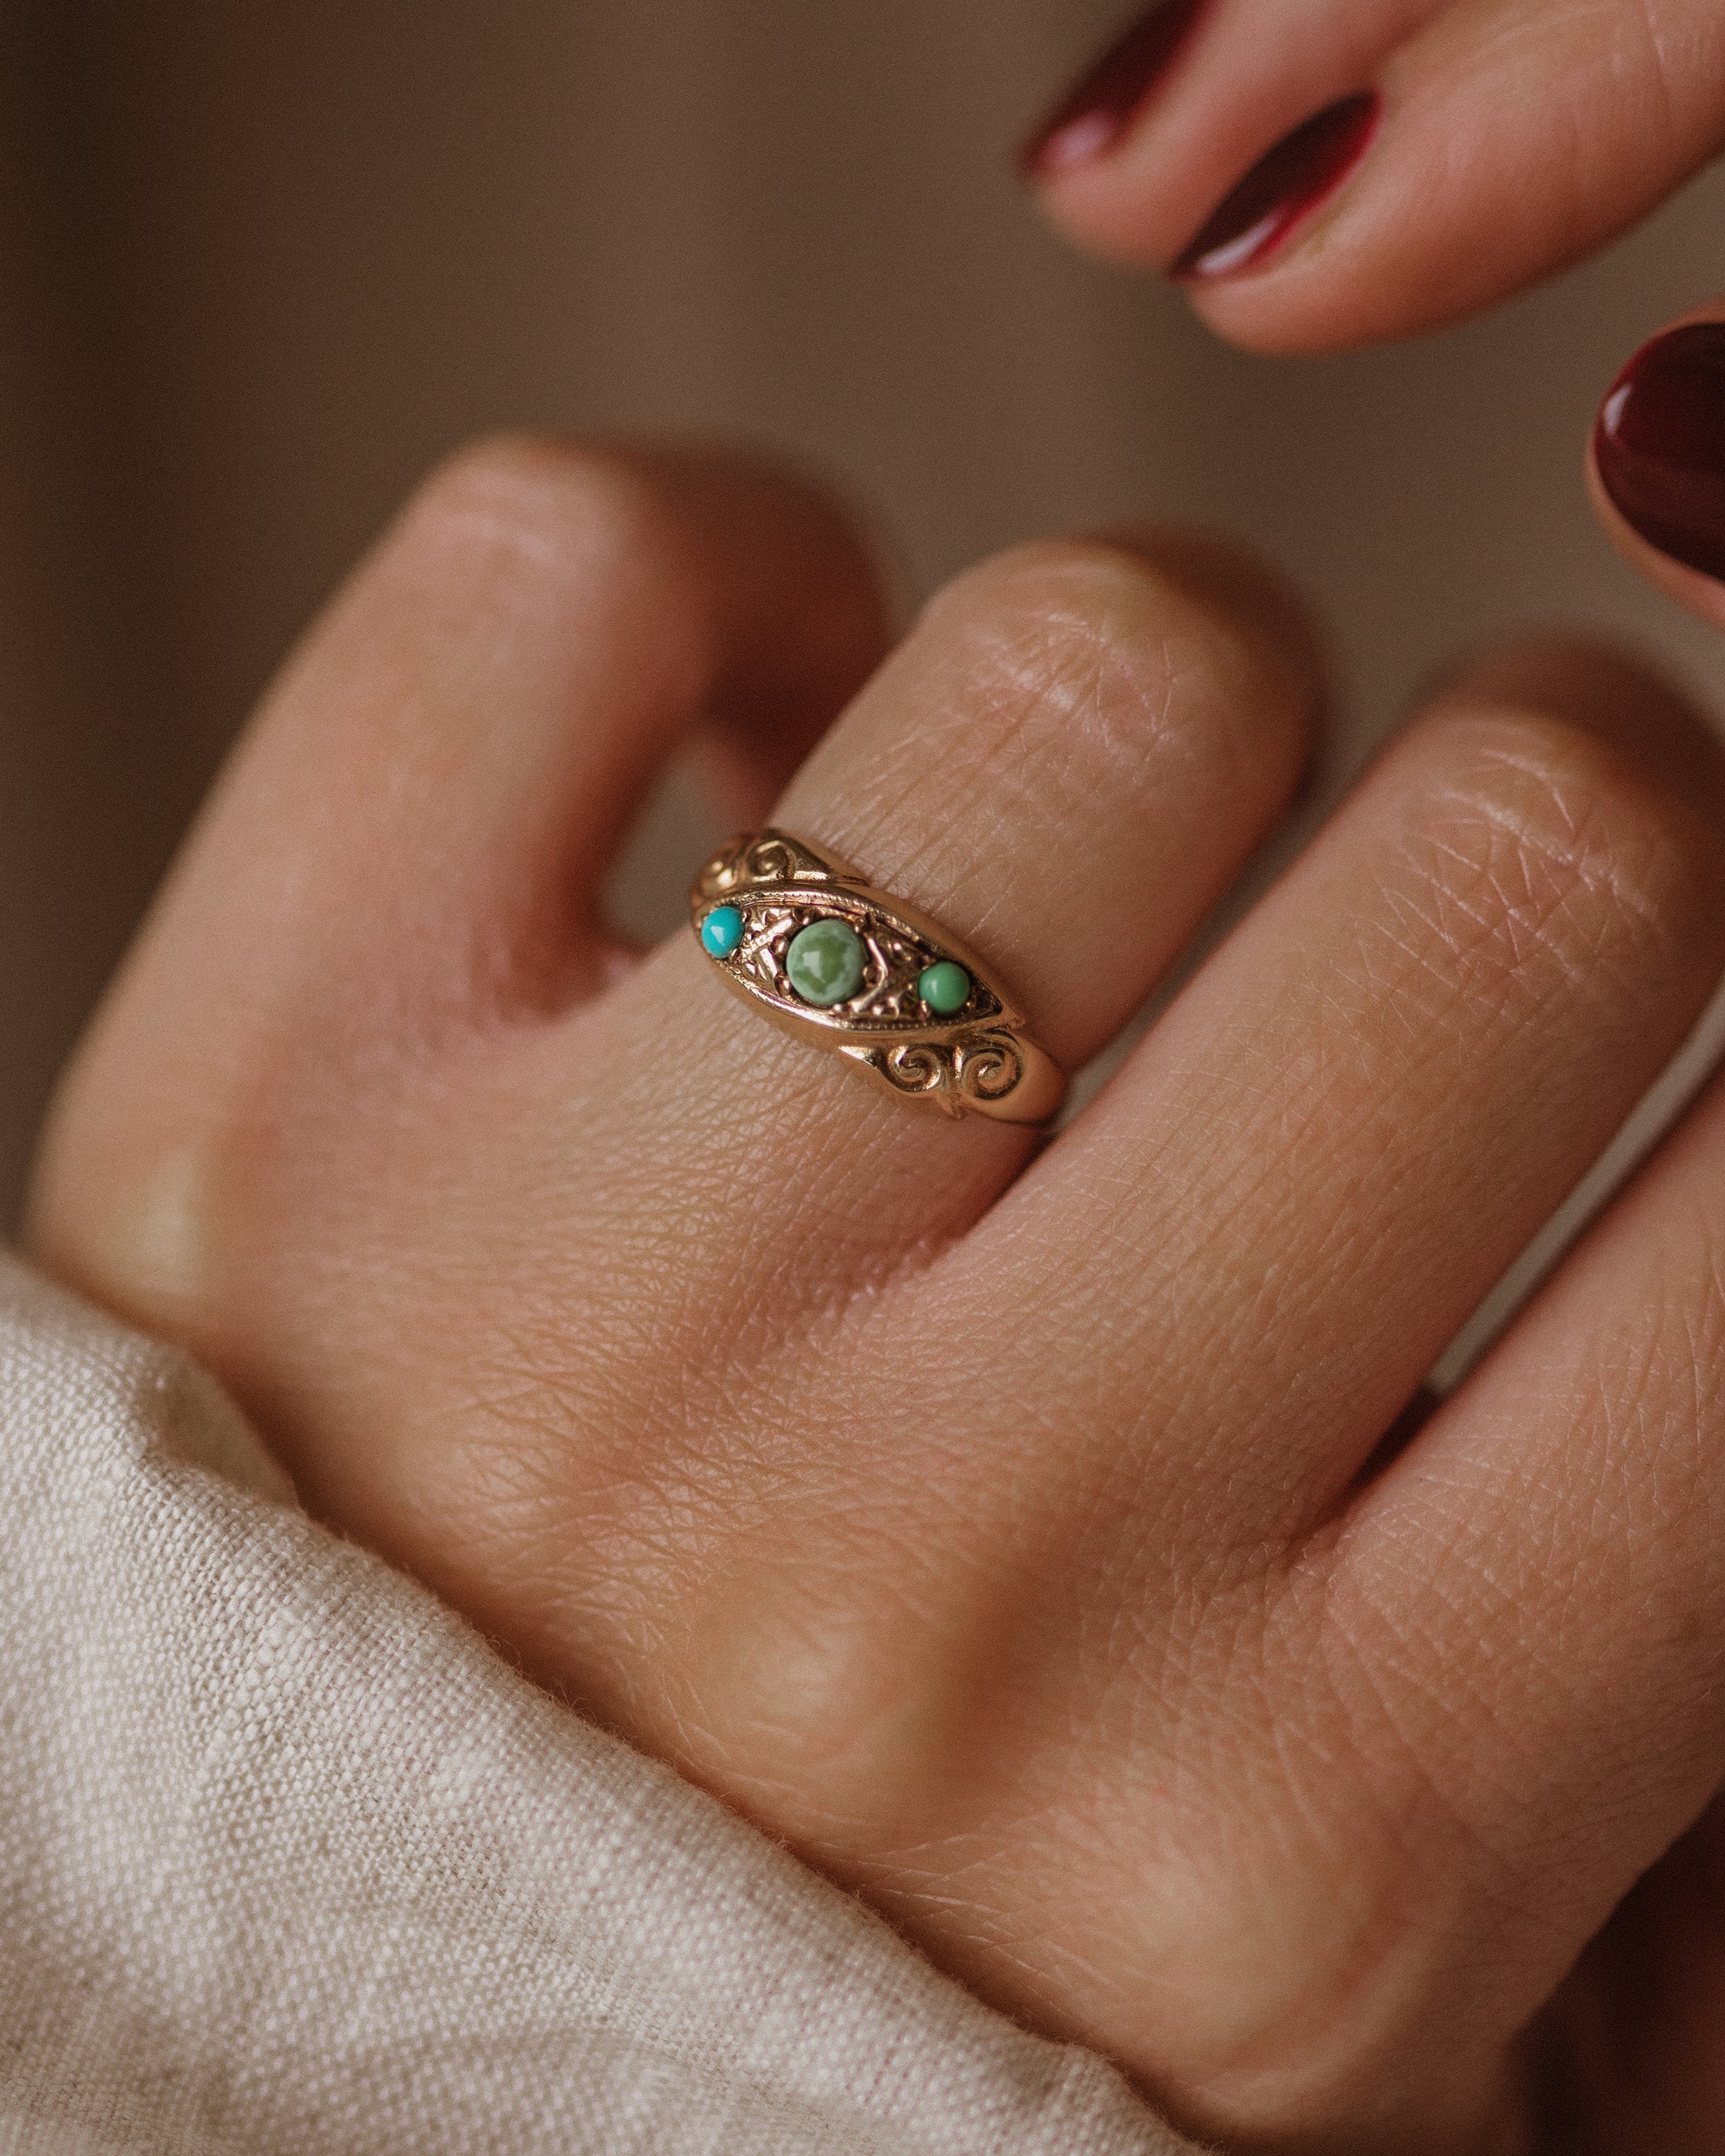 Claudine 1978 Vintage 9ct Gold Turquoise Trilogy Ring